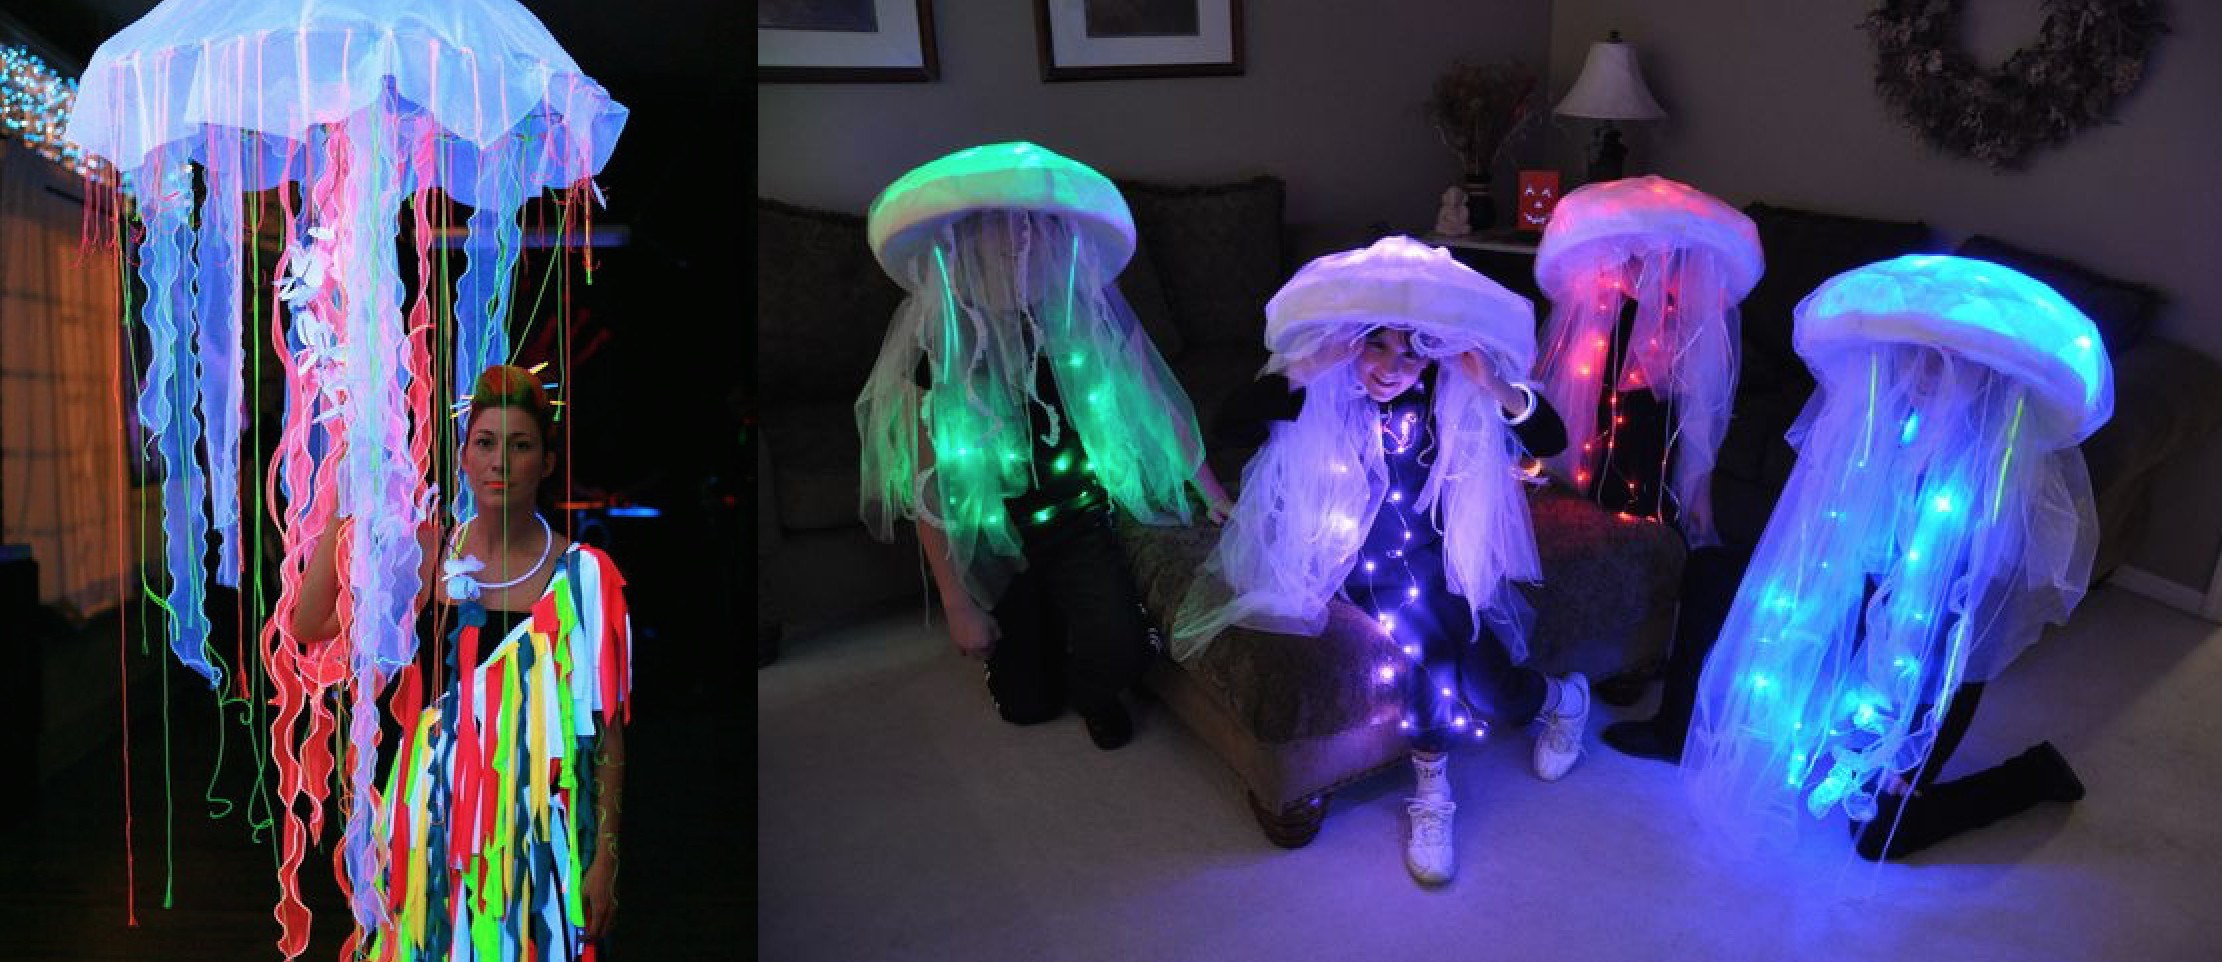 DIY Jellyfish Costumes
 Turn heads at any Halloween party with one of these high